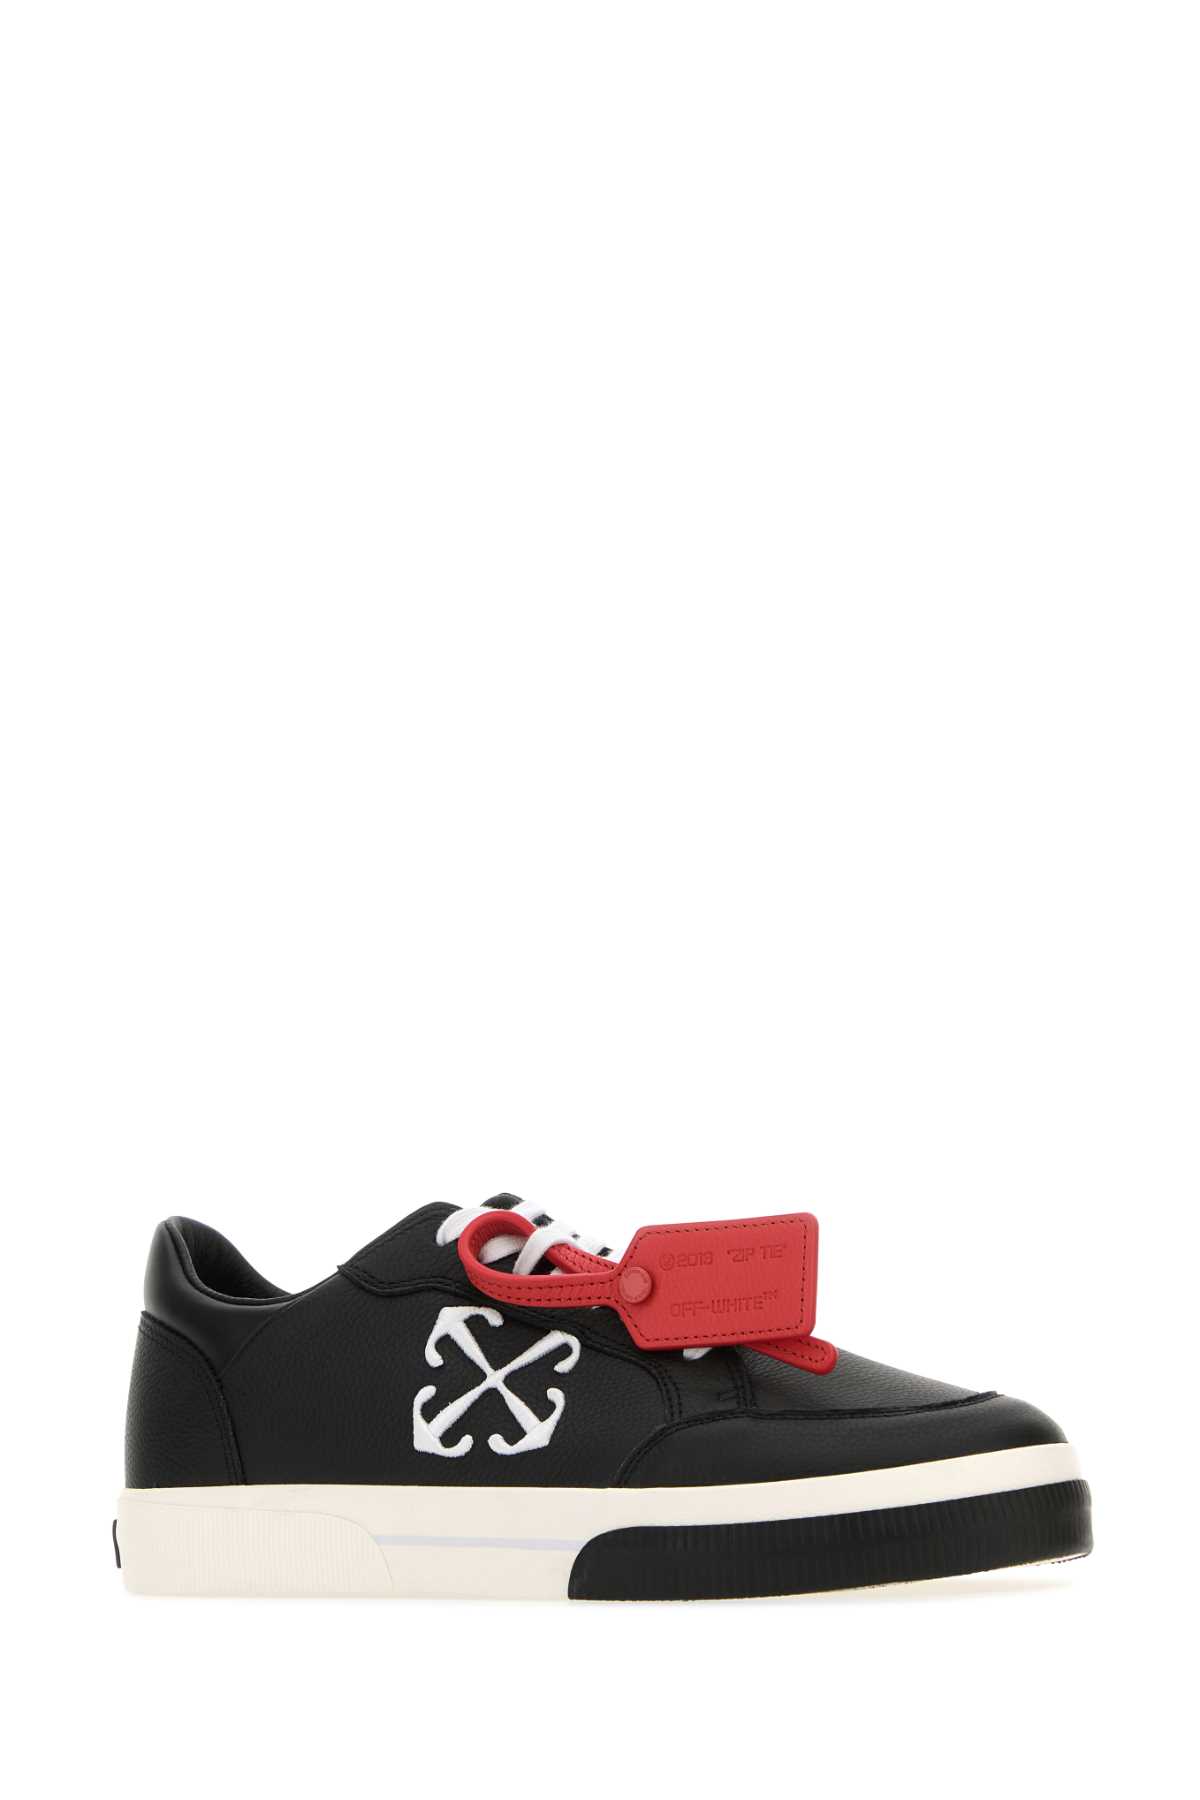 OFF-WHITE BLACK LEATHER NEW LOW VULCANIZED SNEAKERS